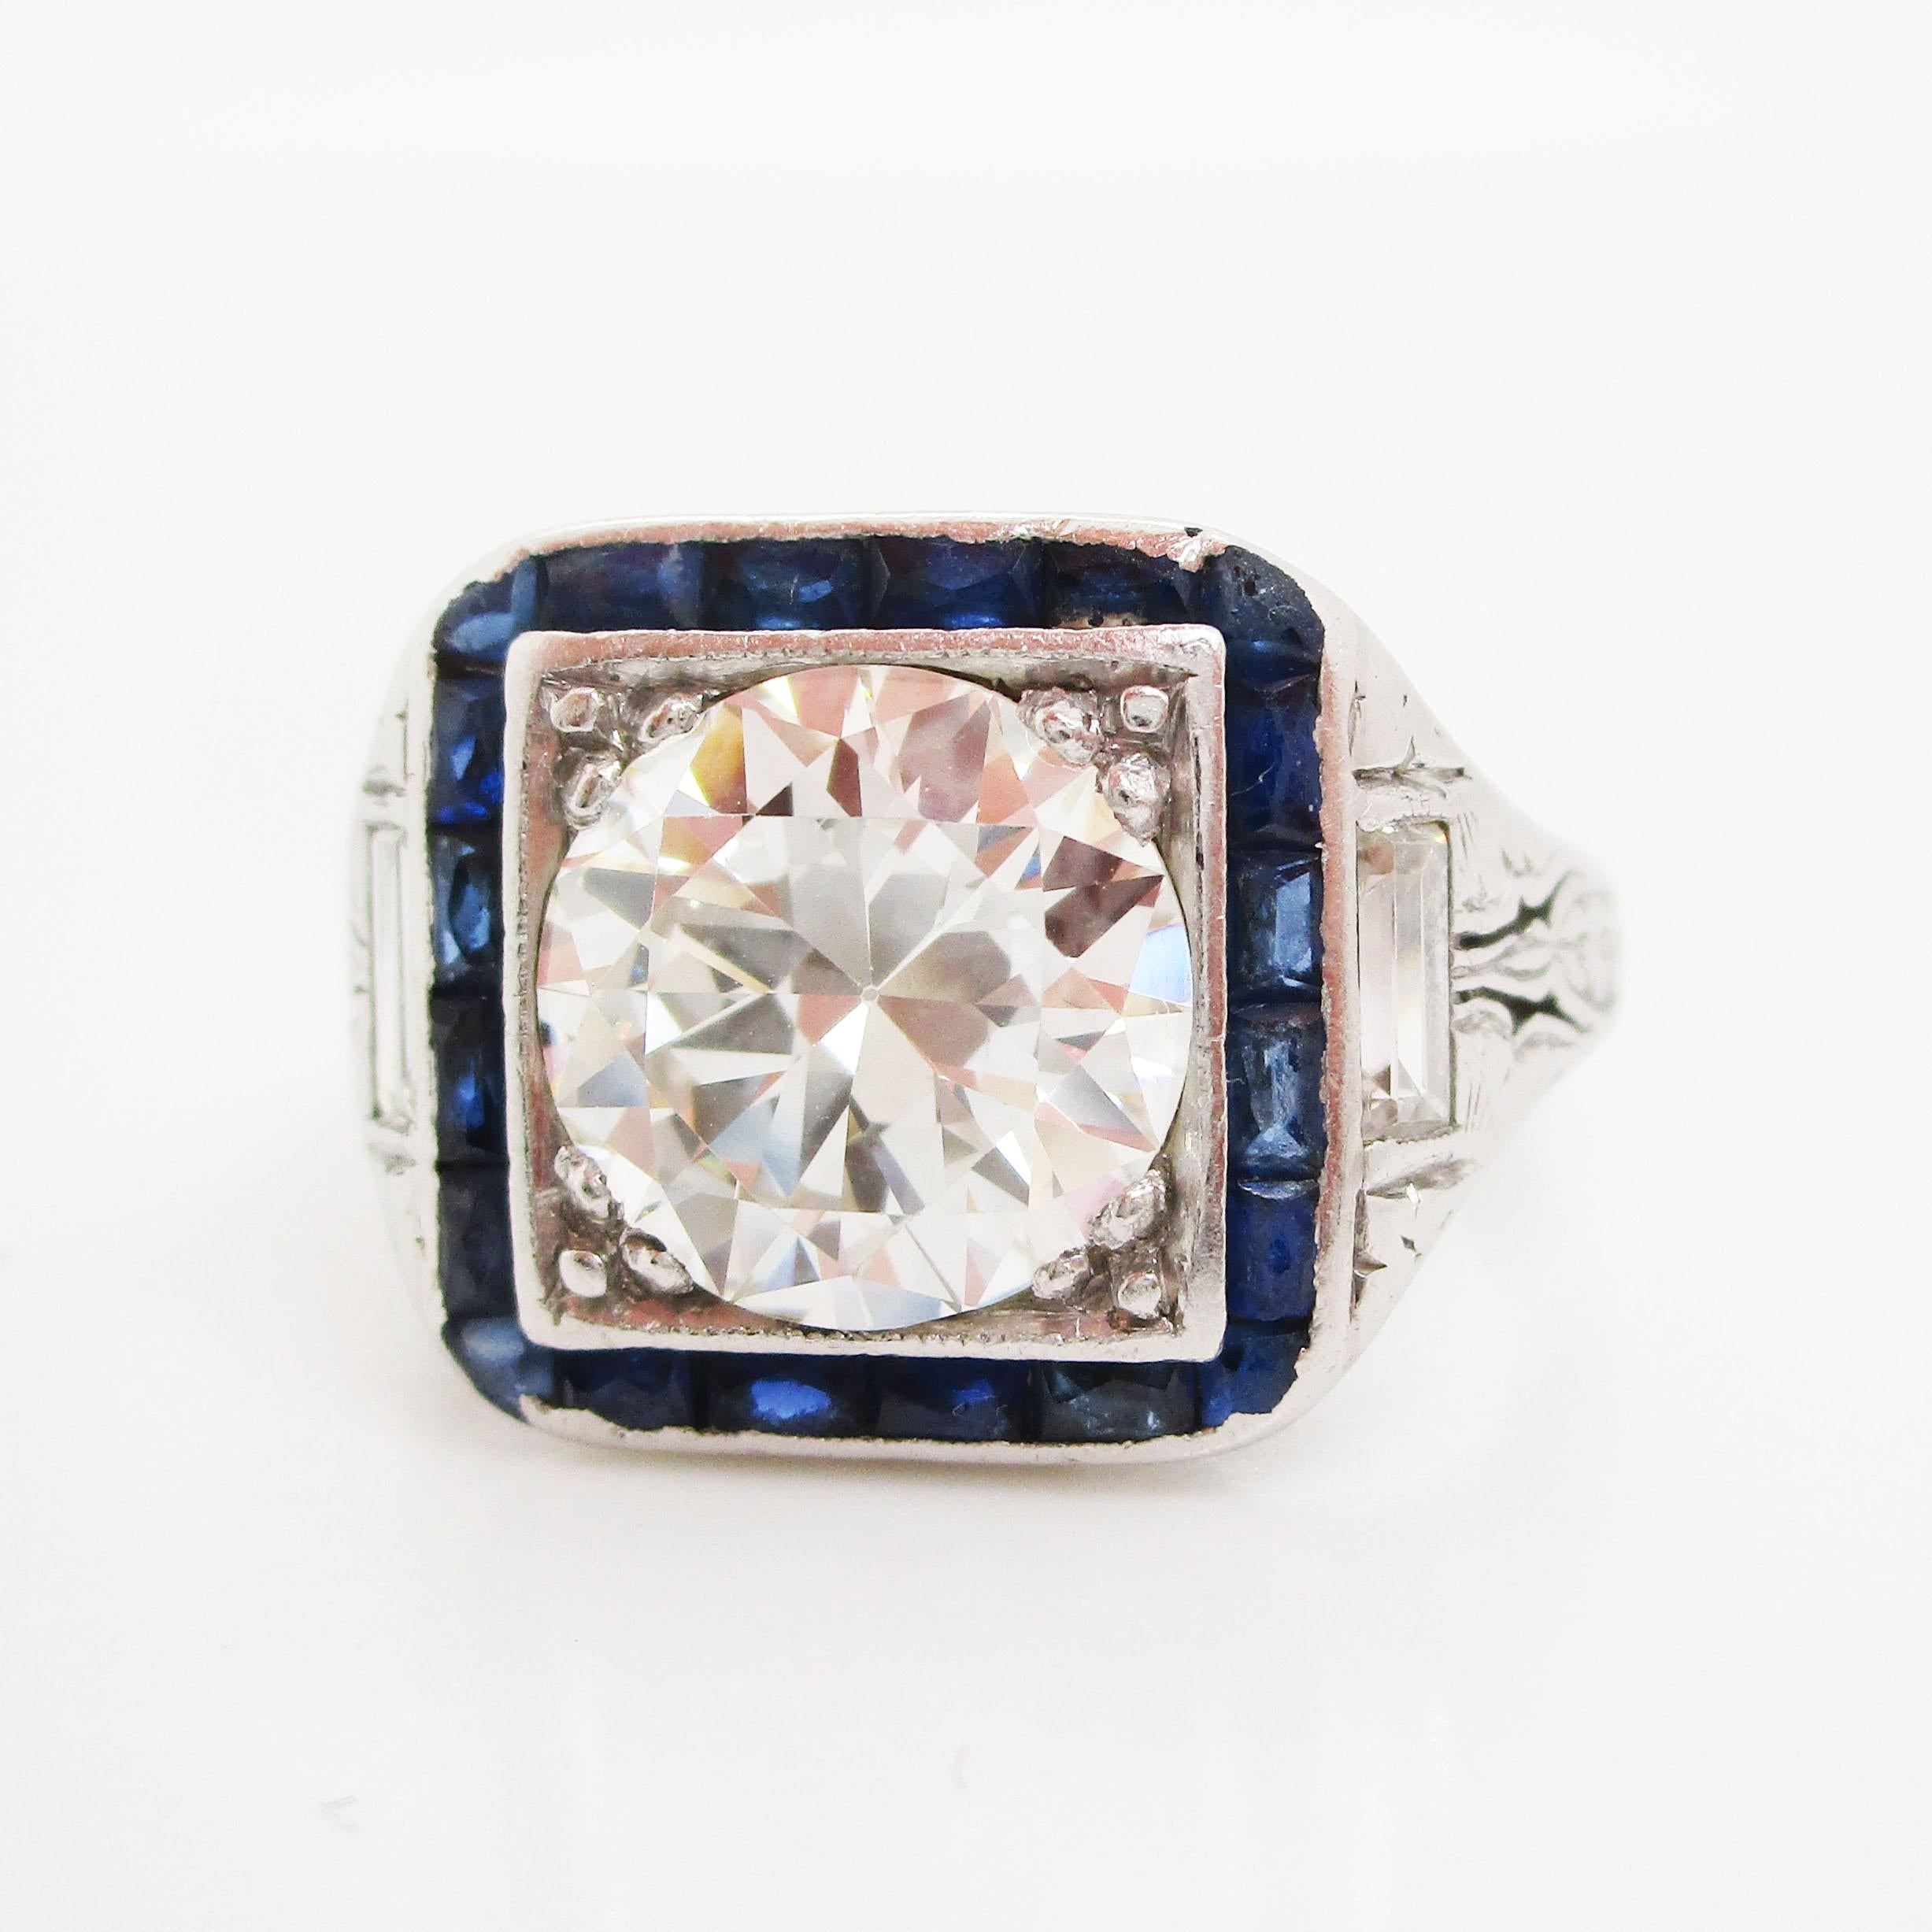 This is a stunning original Art Deco ring in platinum with a beautiful white diamond center stone framed by French cut blue sapphires. The geometric layout and the contrast of white and blue creates a bold, elegant look that is distinctly Art Deco.